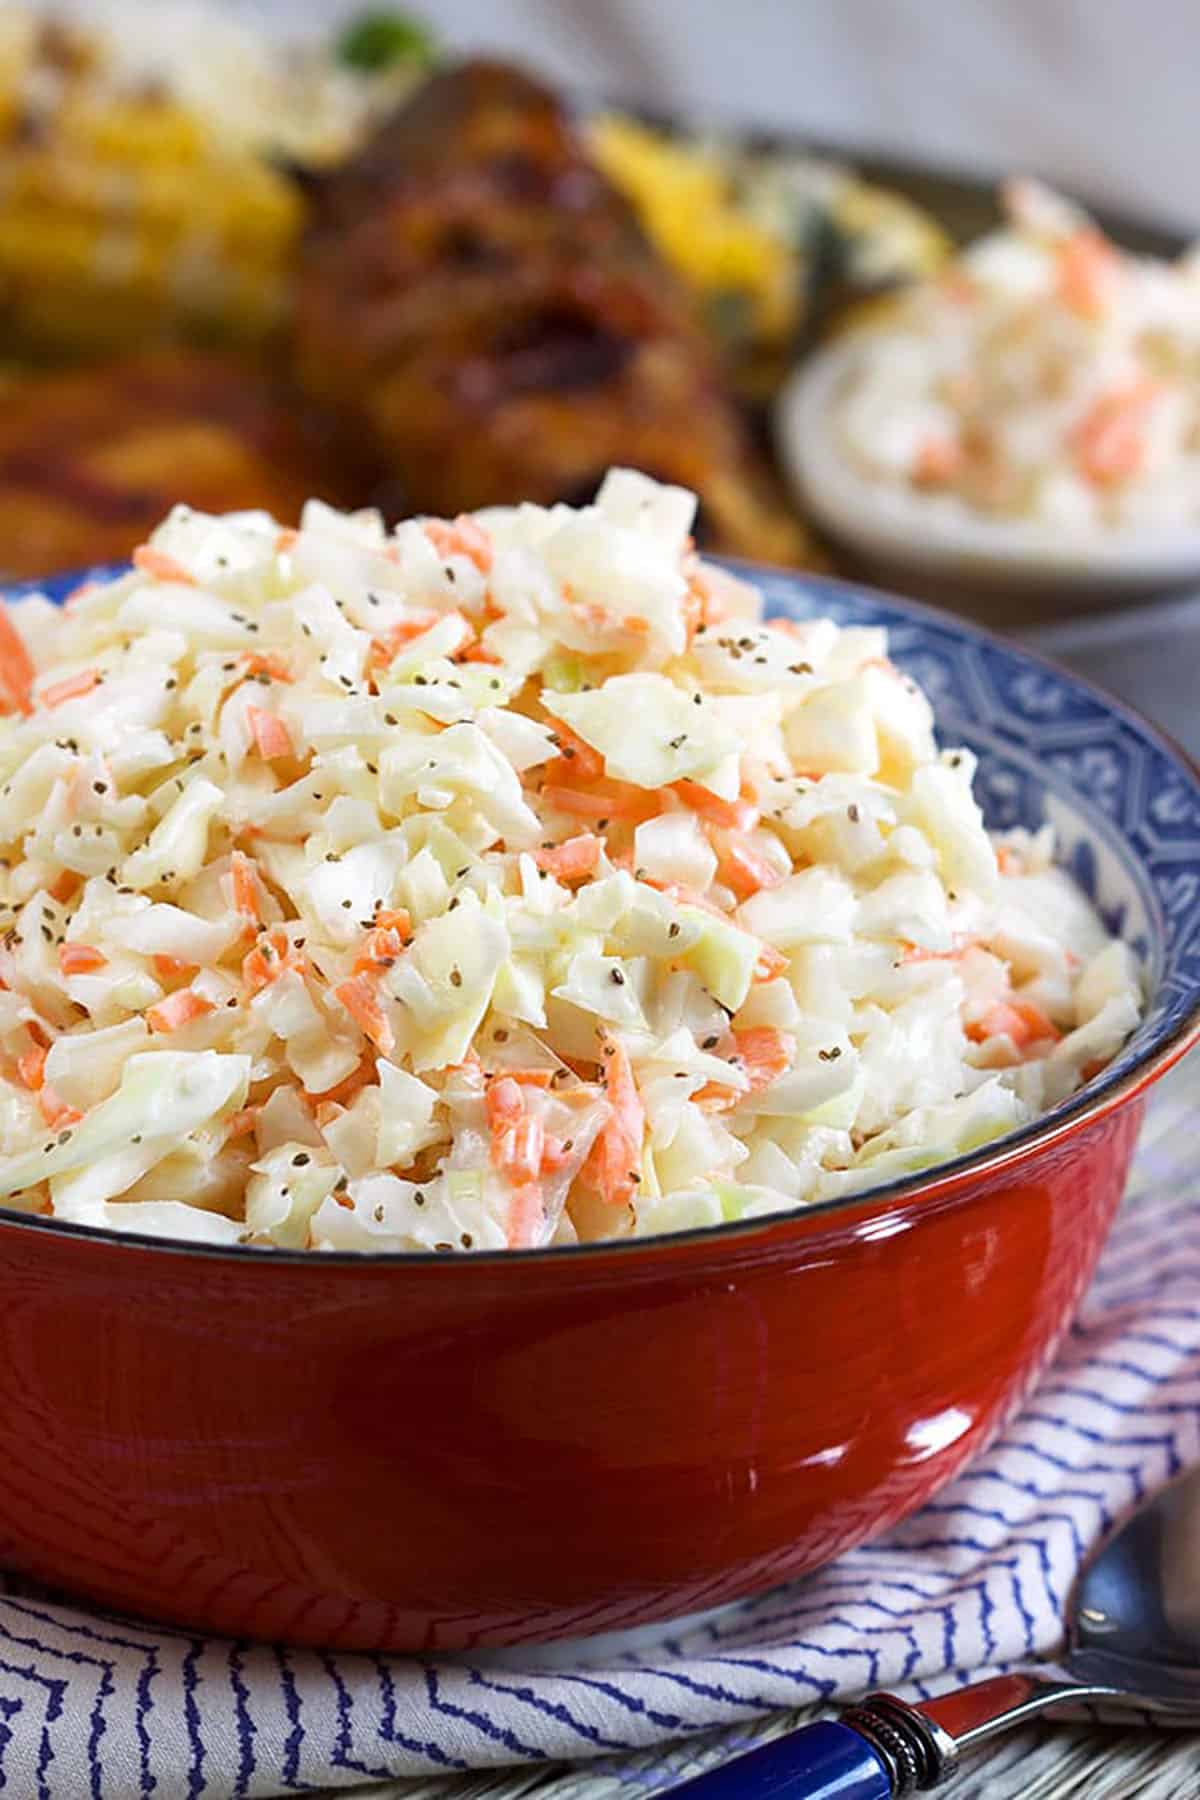 Coleslaw in a red bowl on a blue and white striped napkin with chicken in the background.